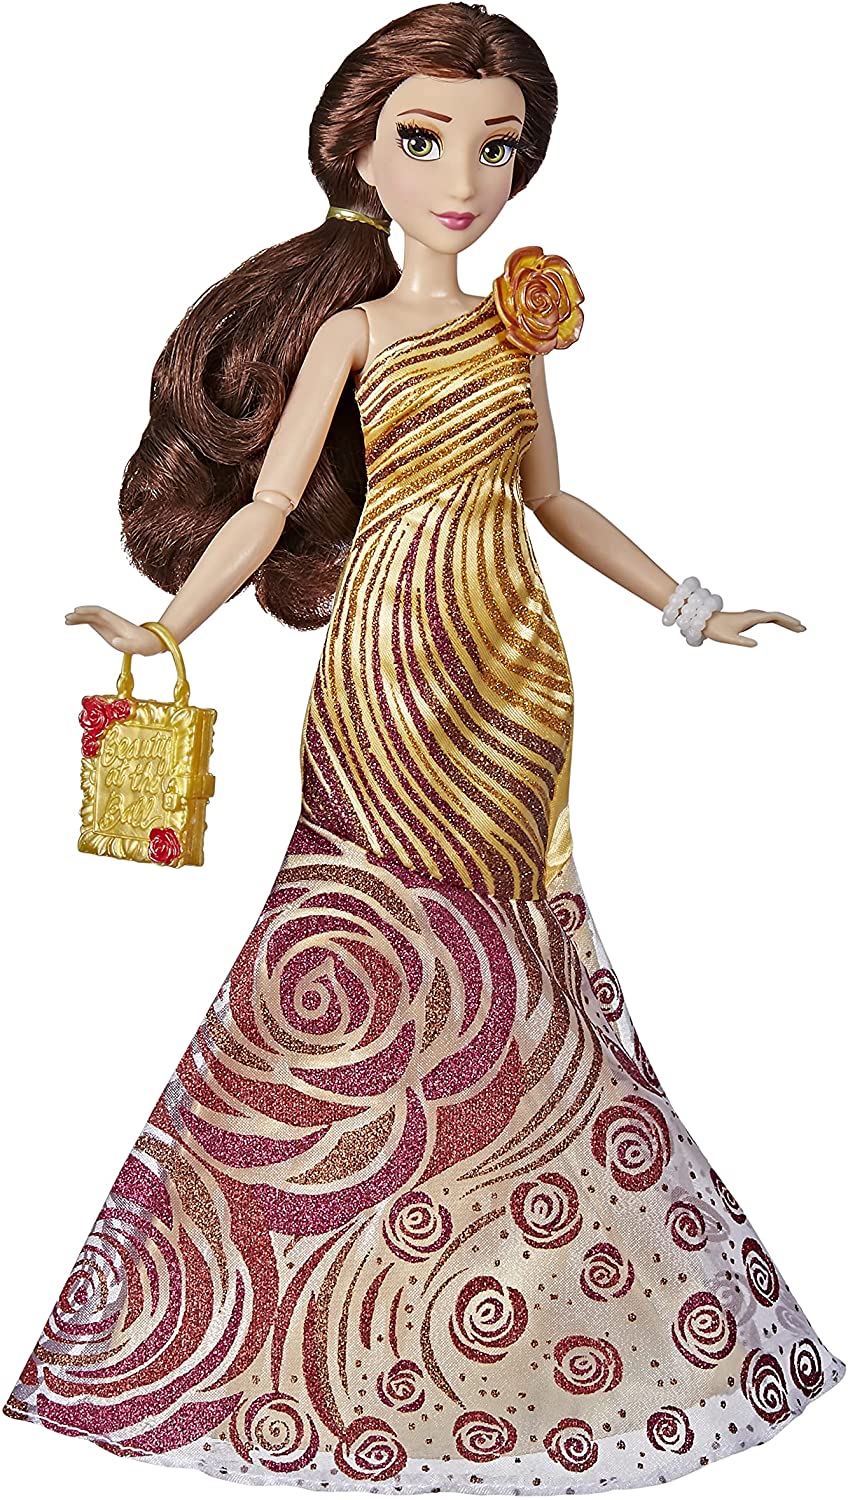 New Disney Princess Style Series Belle Doll number 12